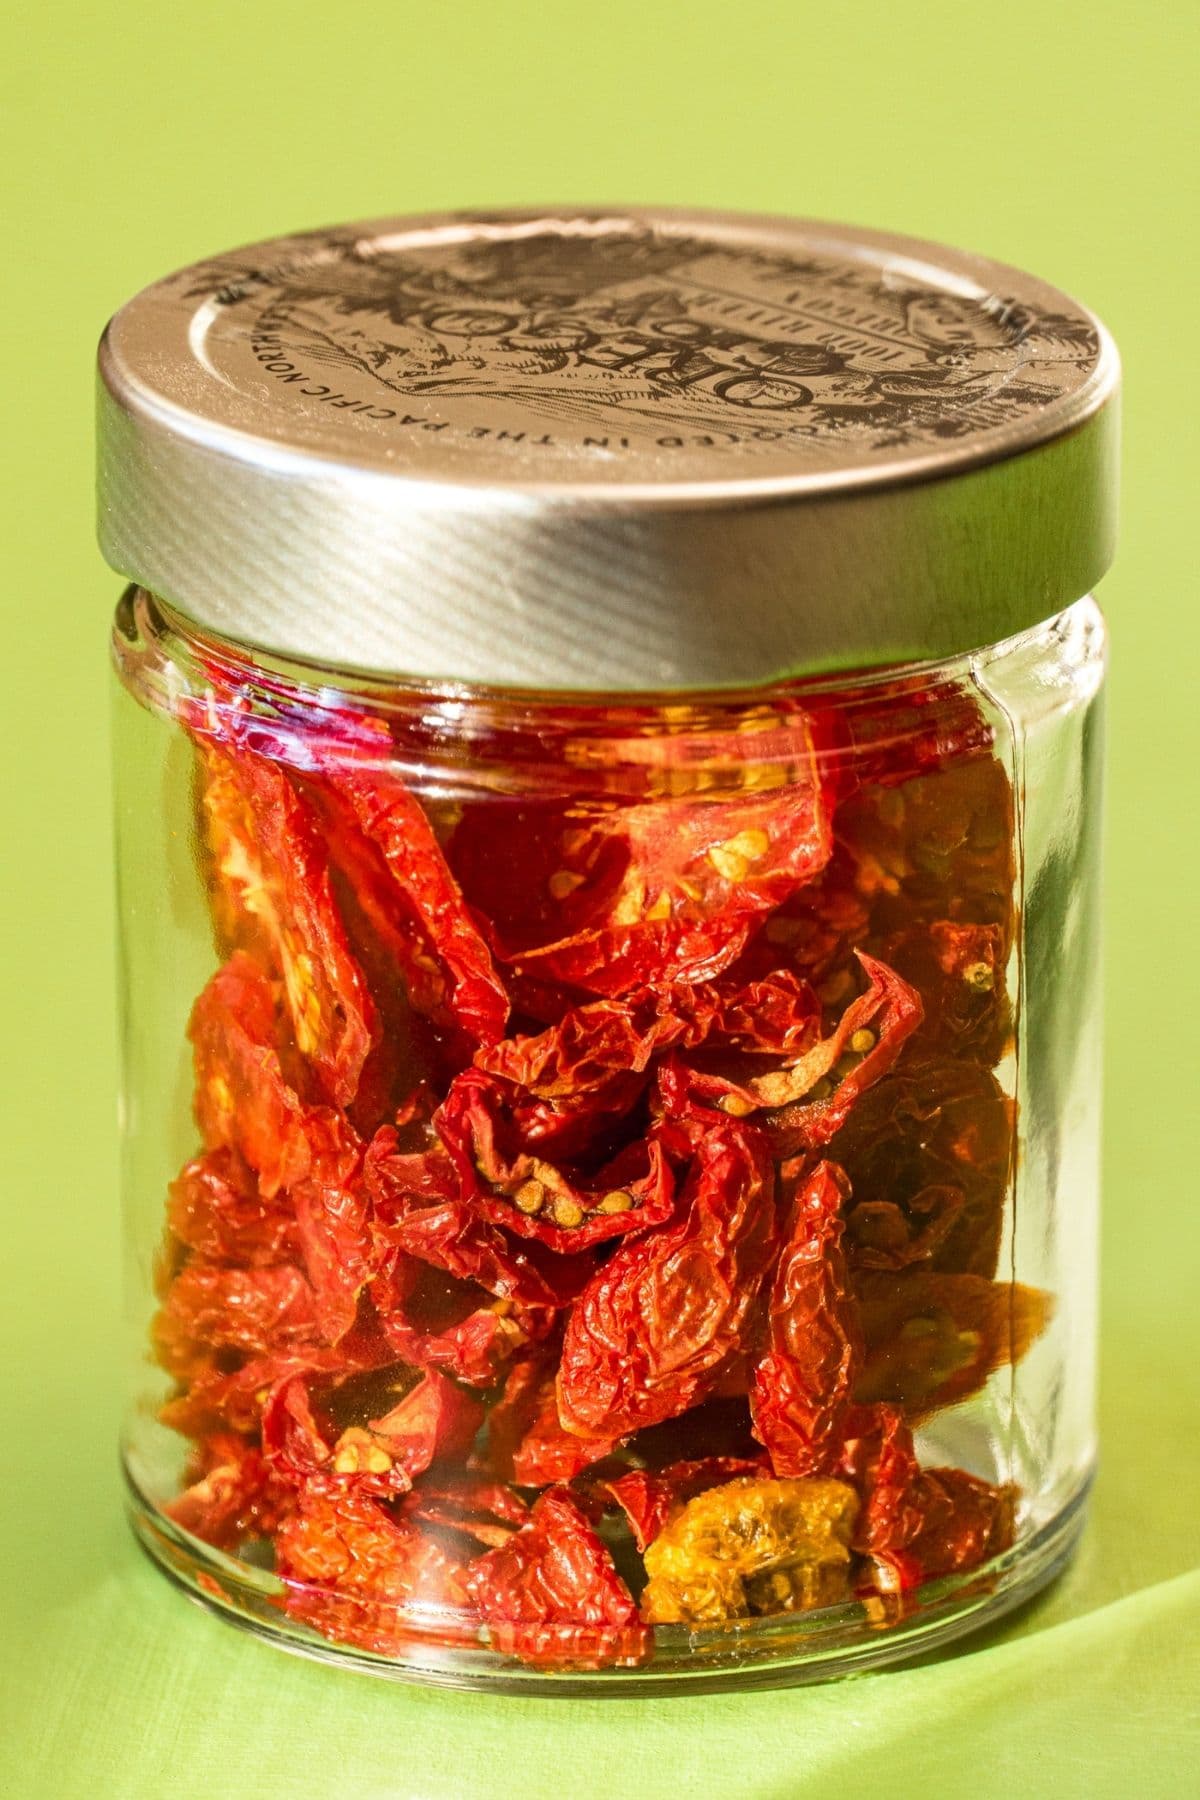 Dried tomatoes in a glass jar